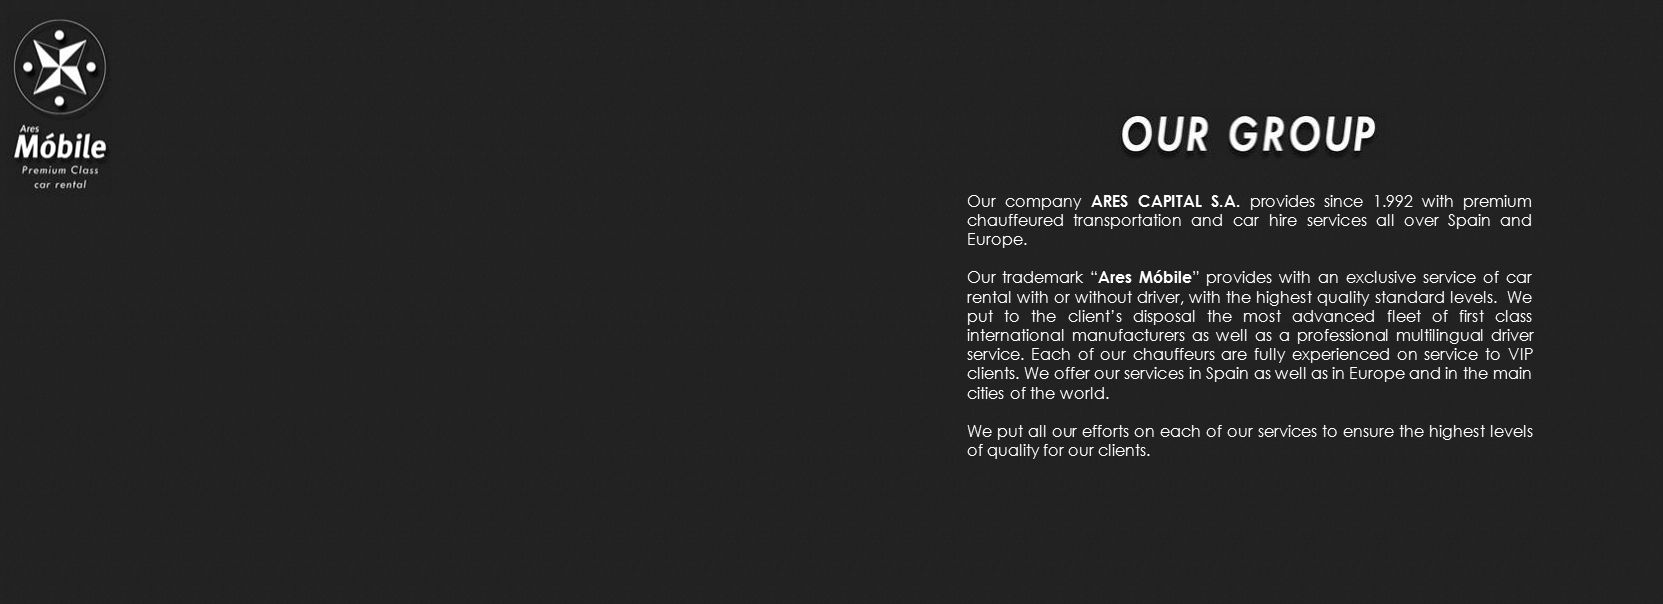 Our company ARES CAPITAL S.A.